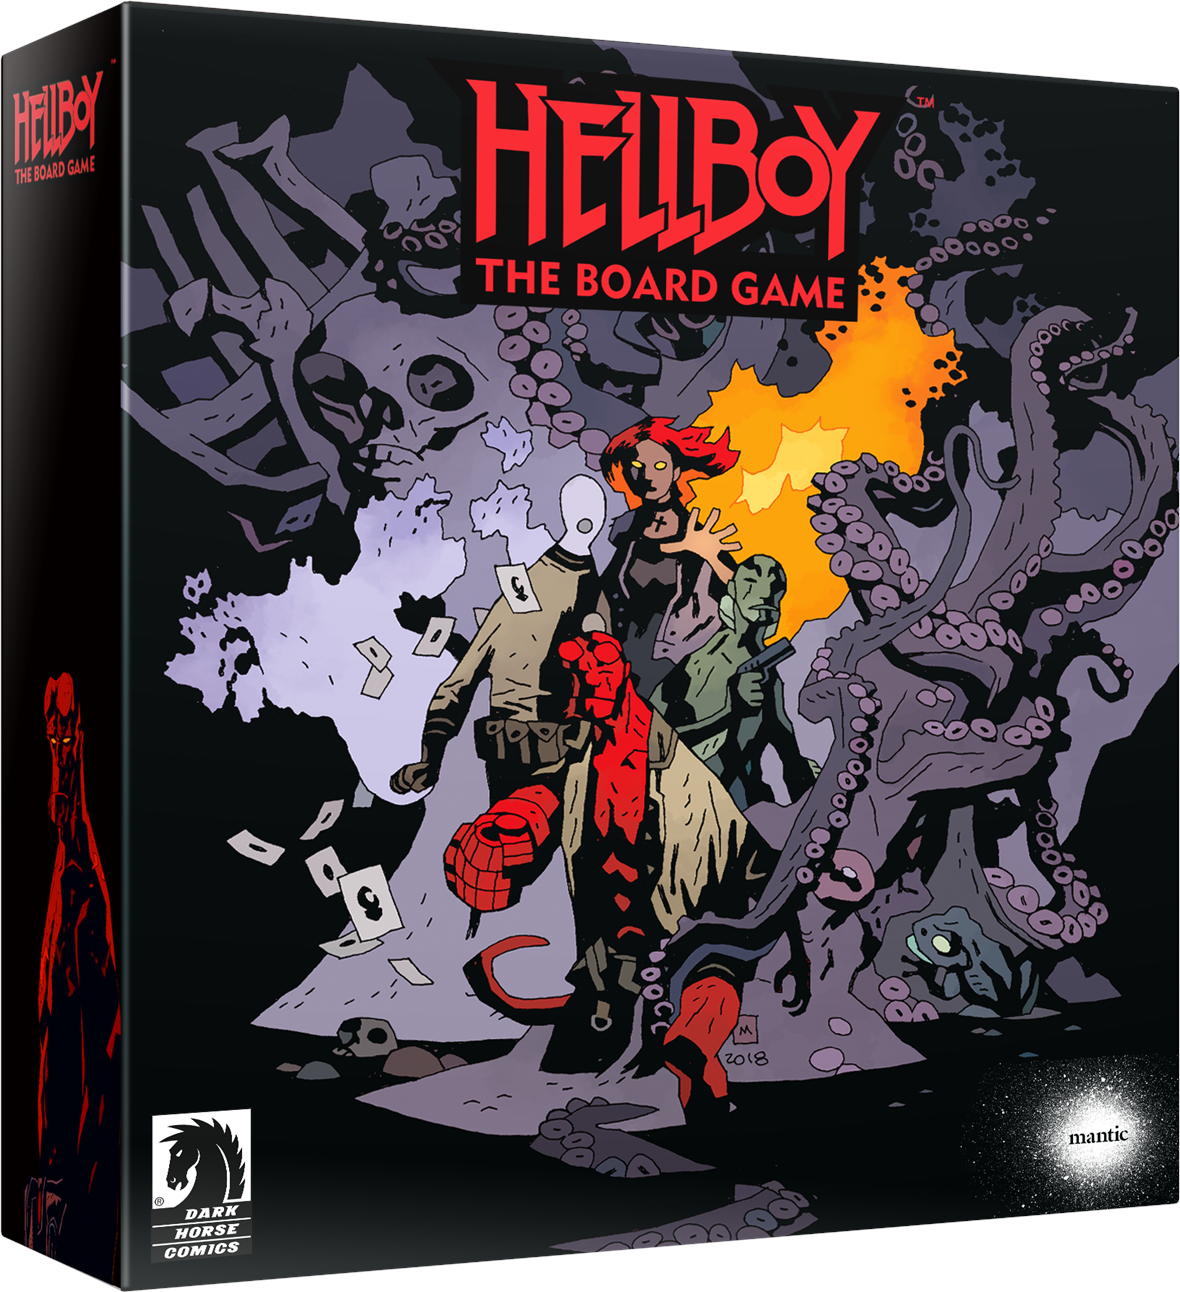 Hellboy: The Board Game (Kickstarter Exclusive Edition + Doors + Scenery + Box Full of Evil)